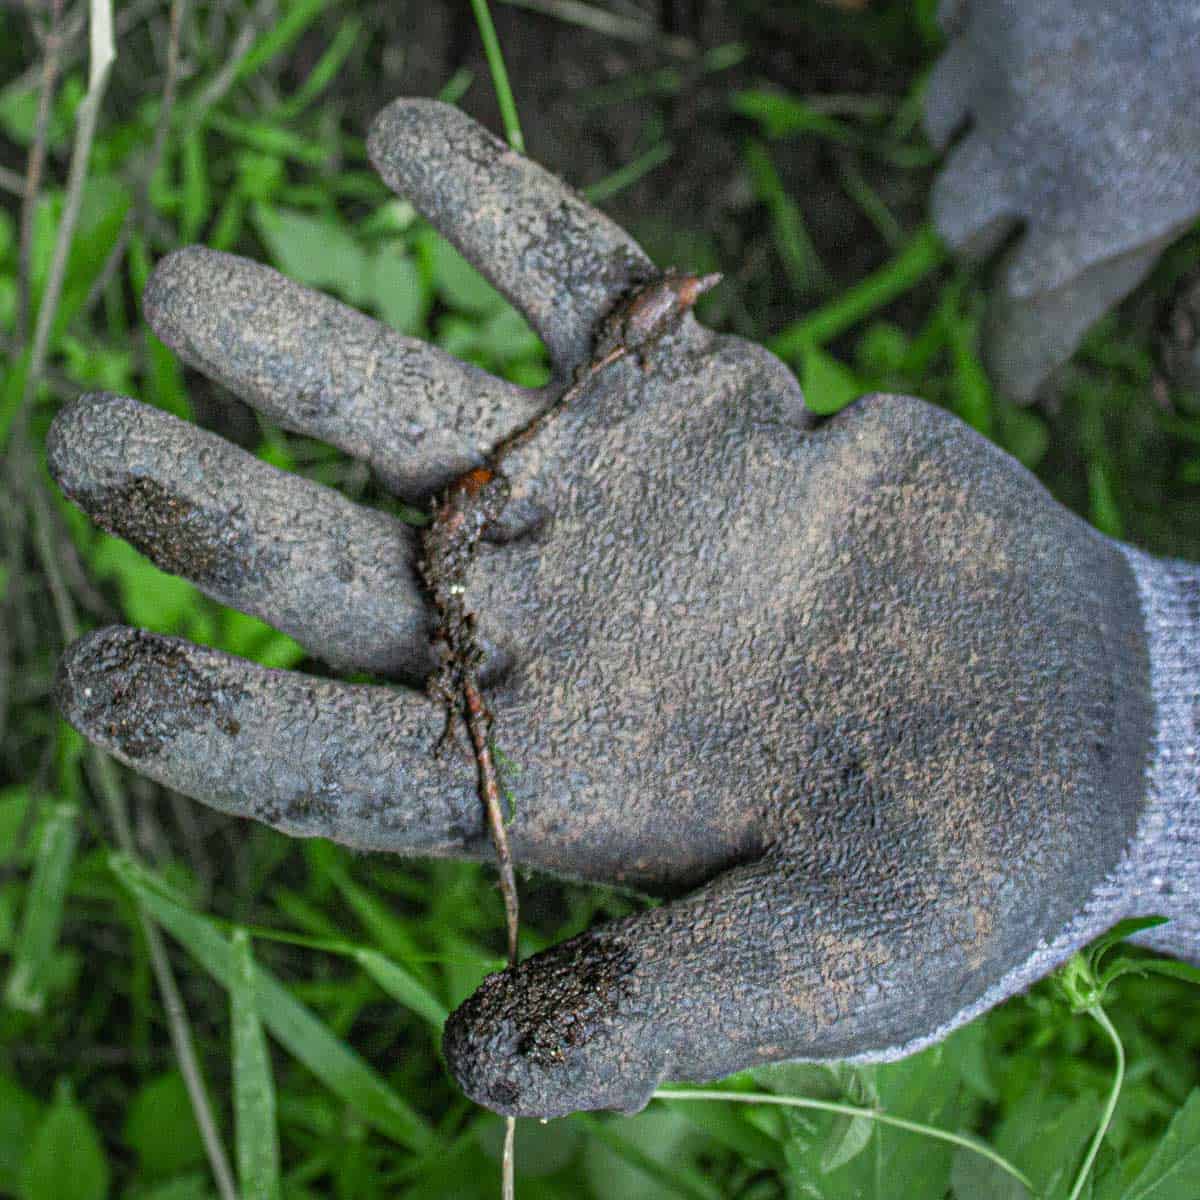 a small tuber connected to a rhizome on a gloved hand